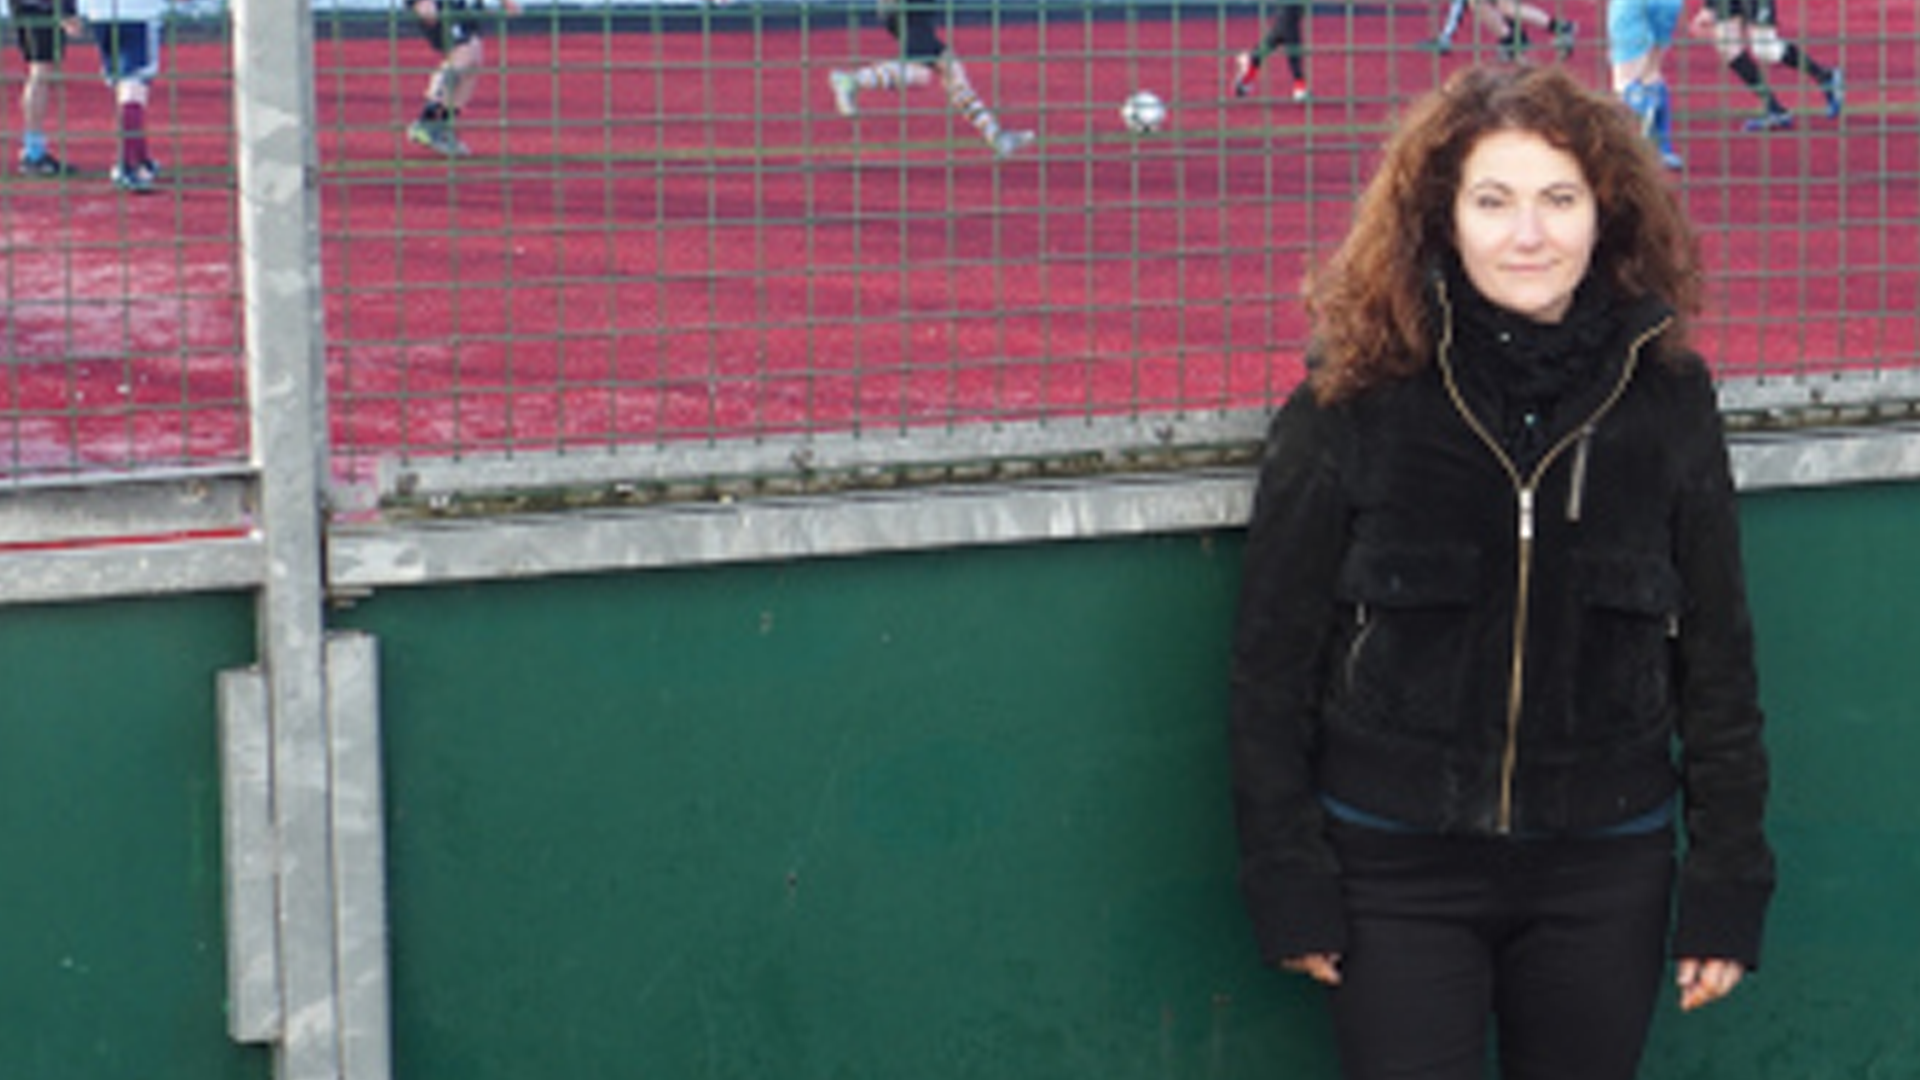 Whalley Range Labour - Angeliki Stogia Comments on New Whalley Range sports facility